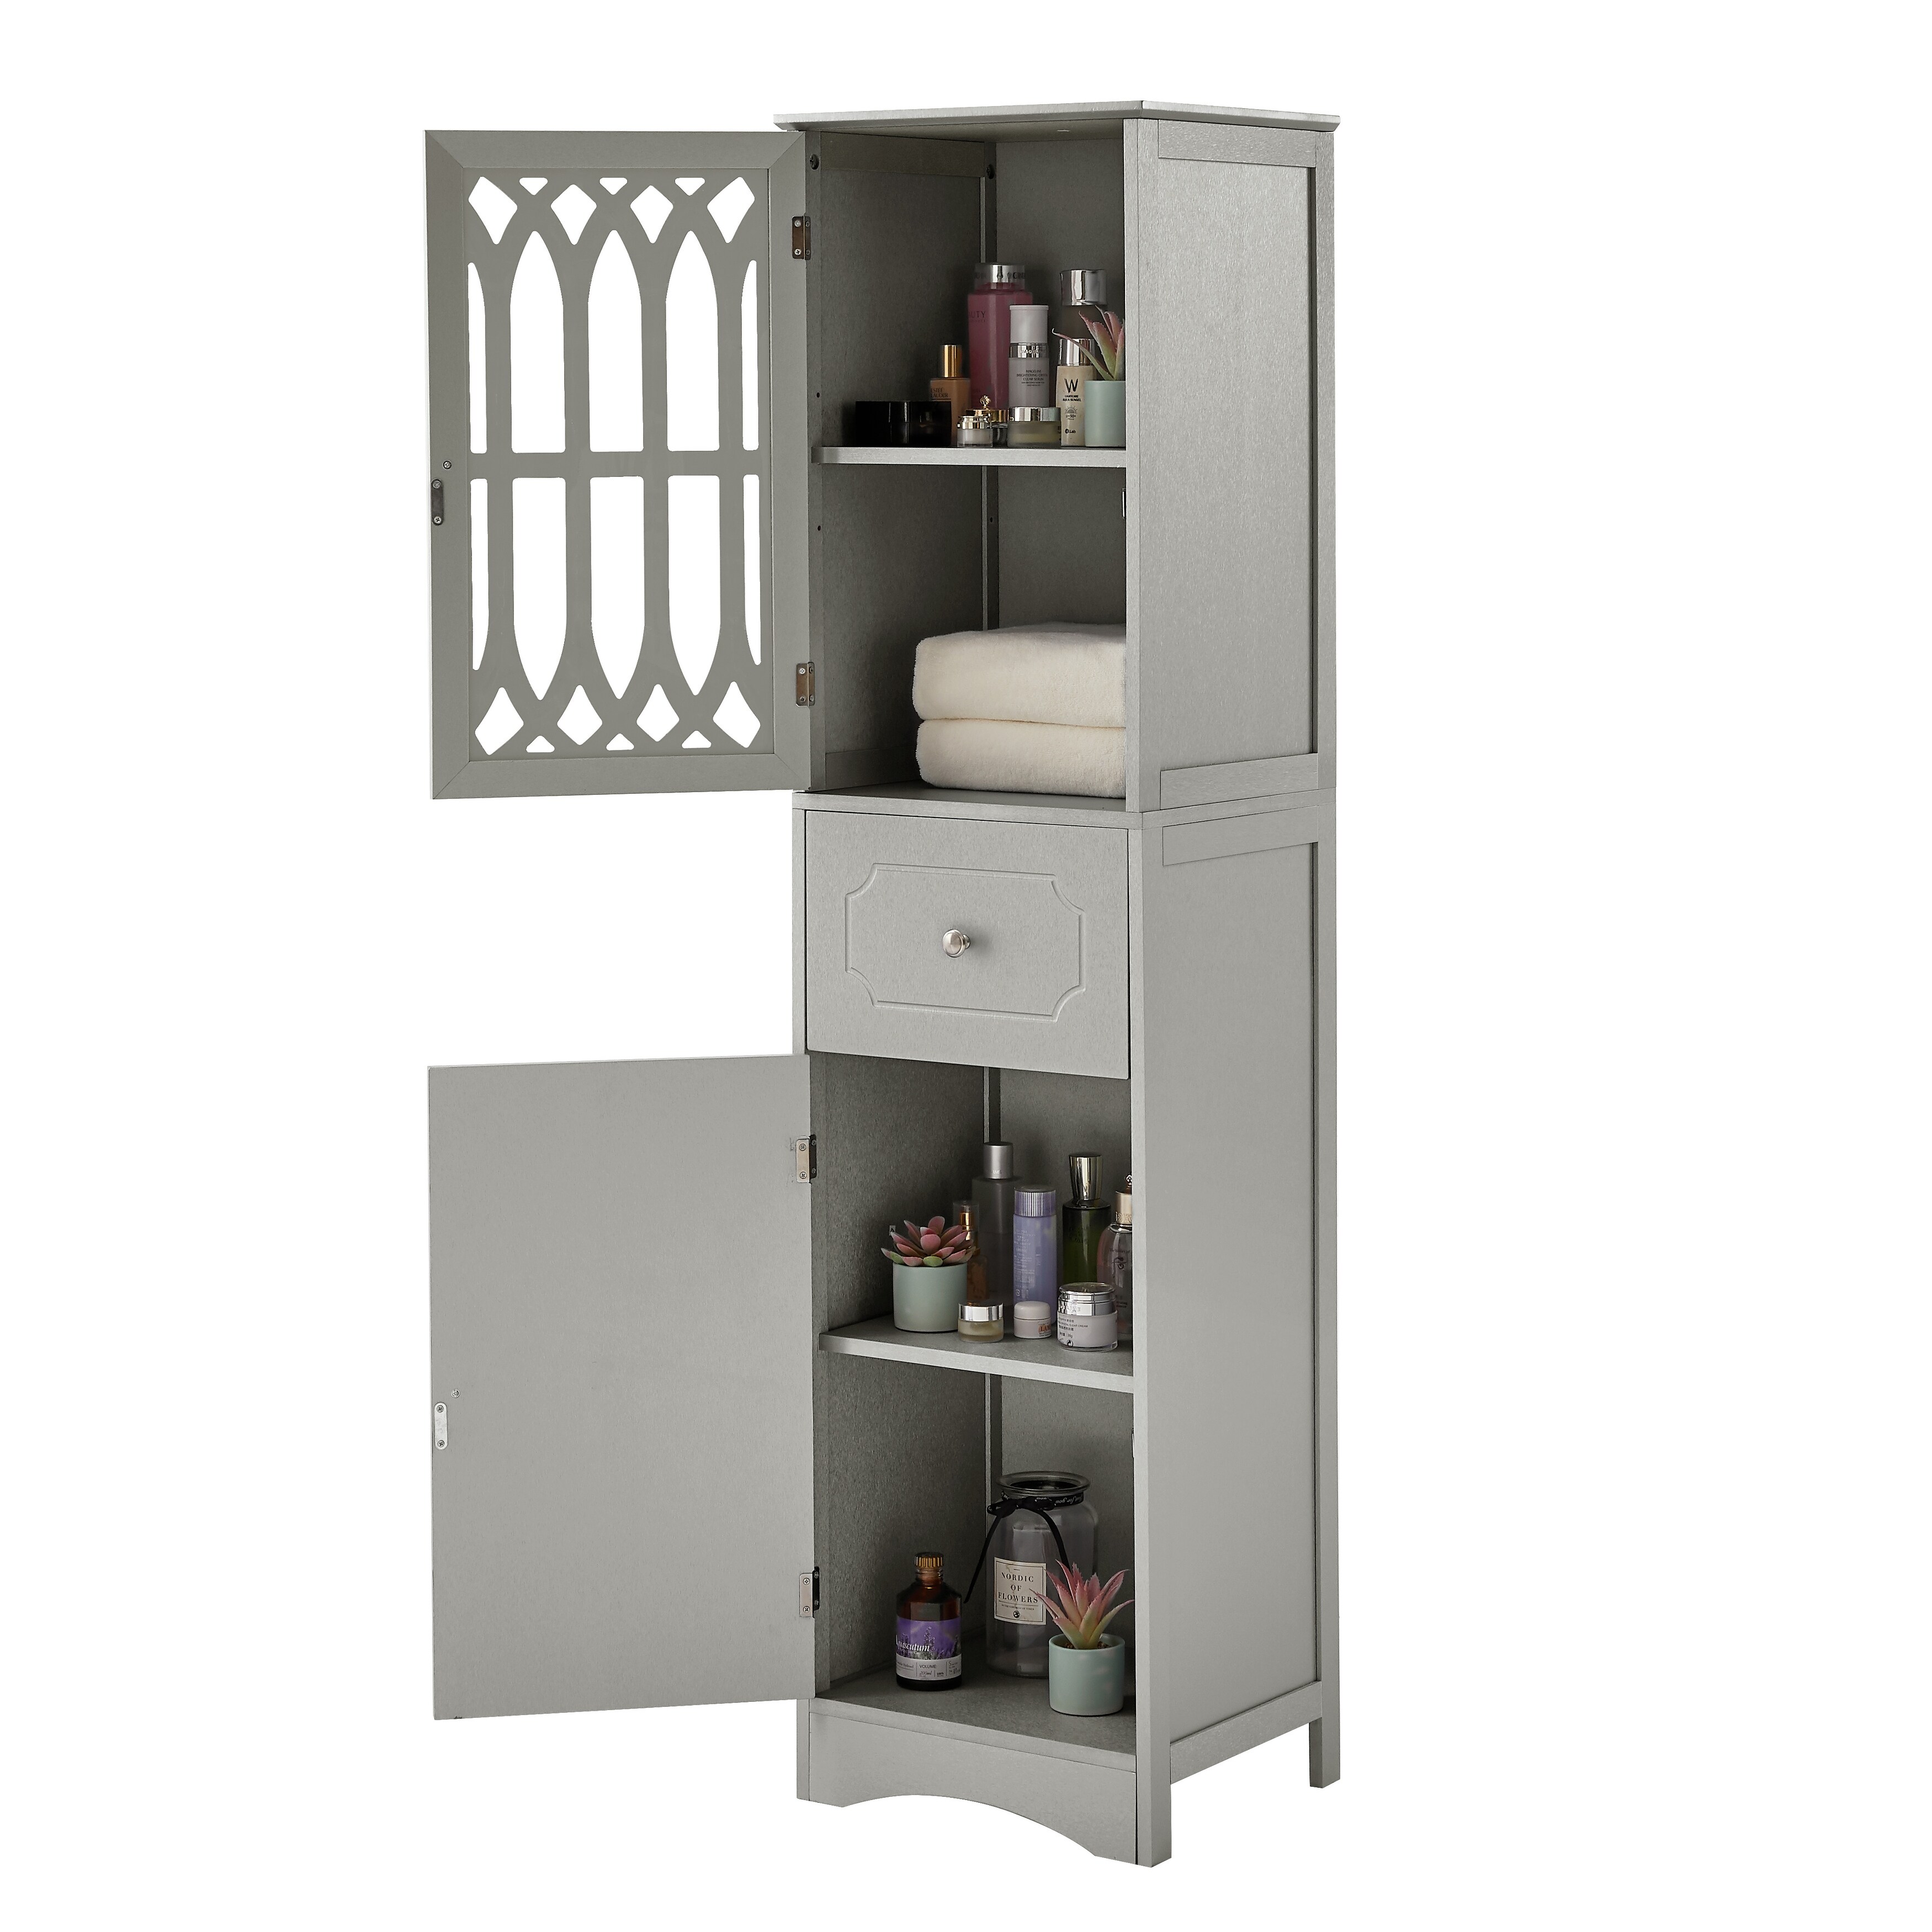 Clearance! Tall Bathroom Cabinet, Freestanding Storage Cabinet with Drawer  and Doors, MDF Board, Acrylic Door, Adjustable Shelf, White 